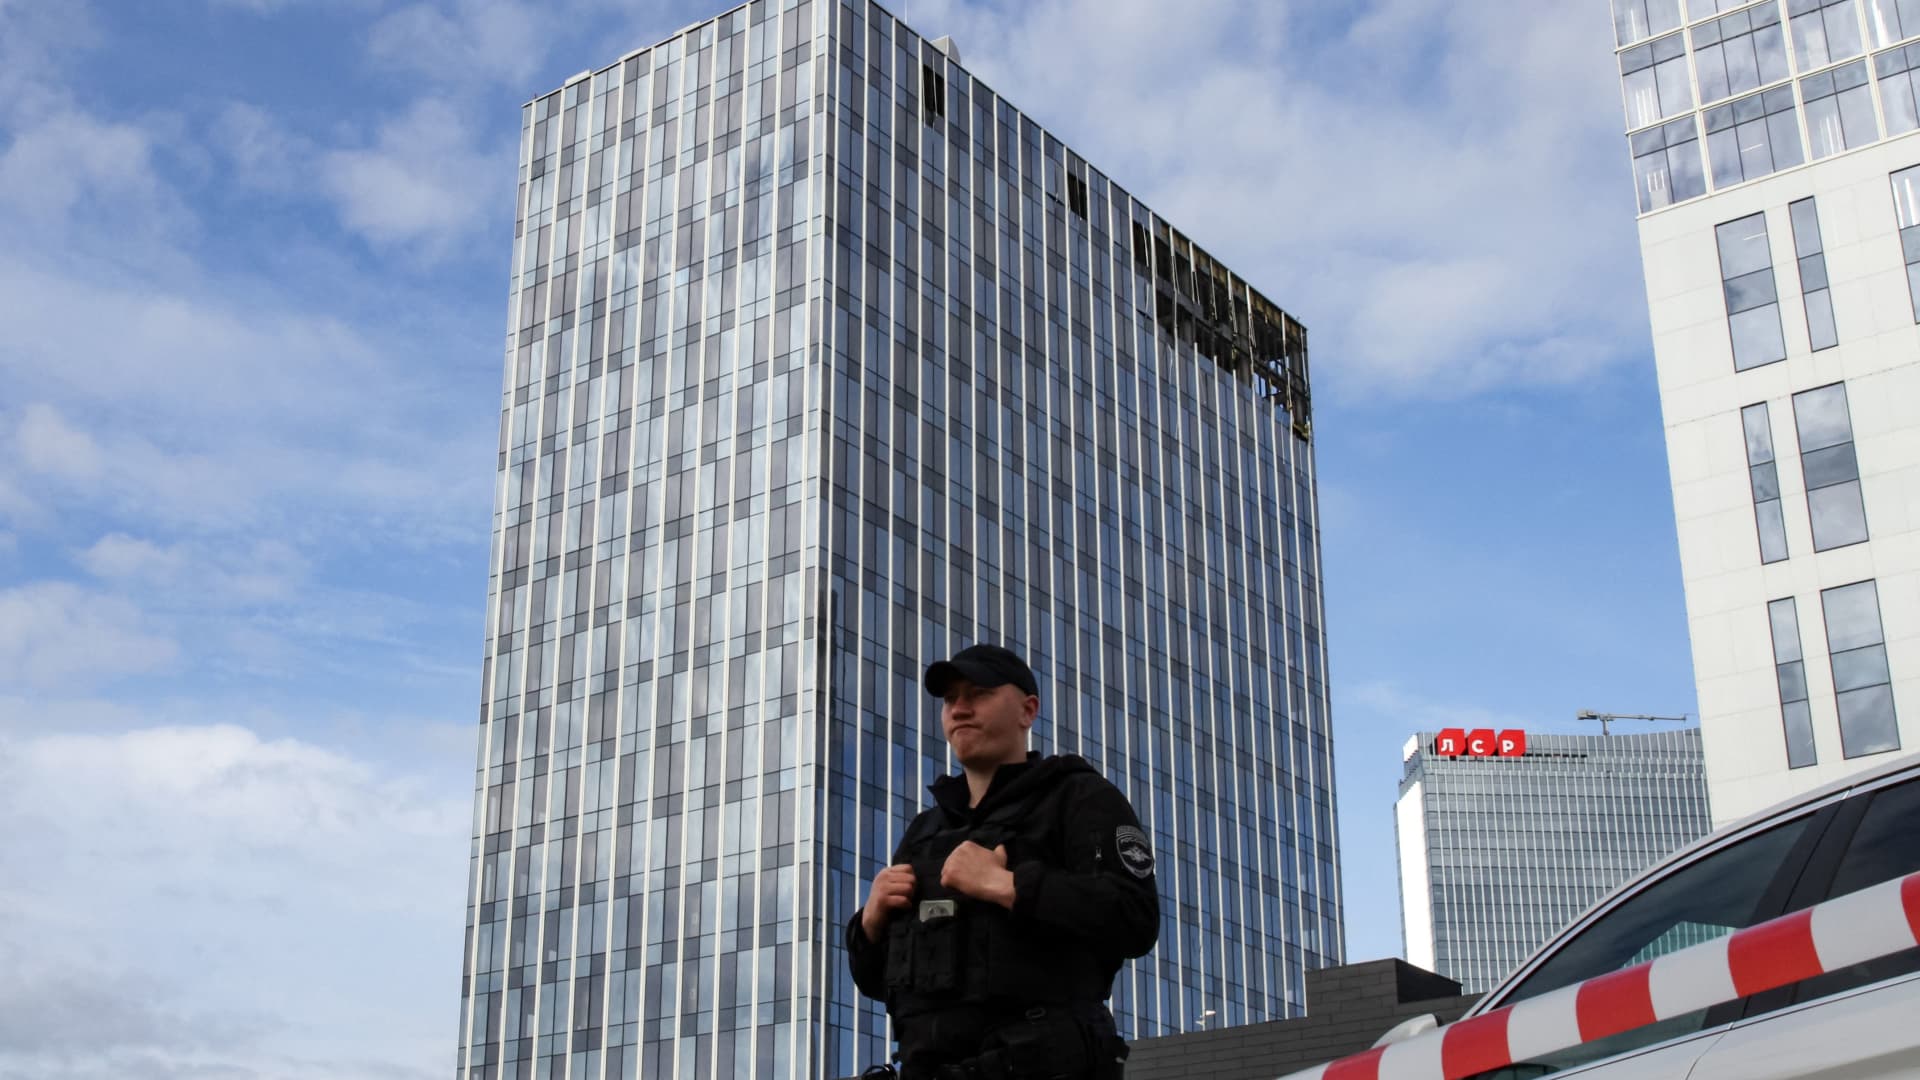 A police officer stands guard in front of a damaged business centre on Likhacheva Street after a reported drone attack in Moscow on July 24, 2023. (Photo by STRINGER / AFP) (Photo by STRINGER/AFP via Getty Images)